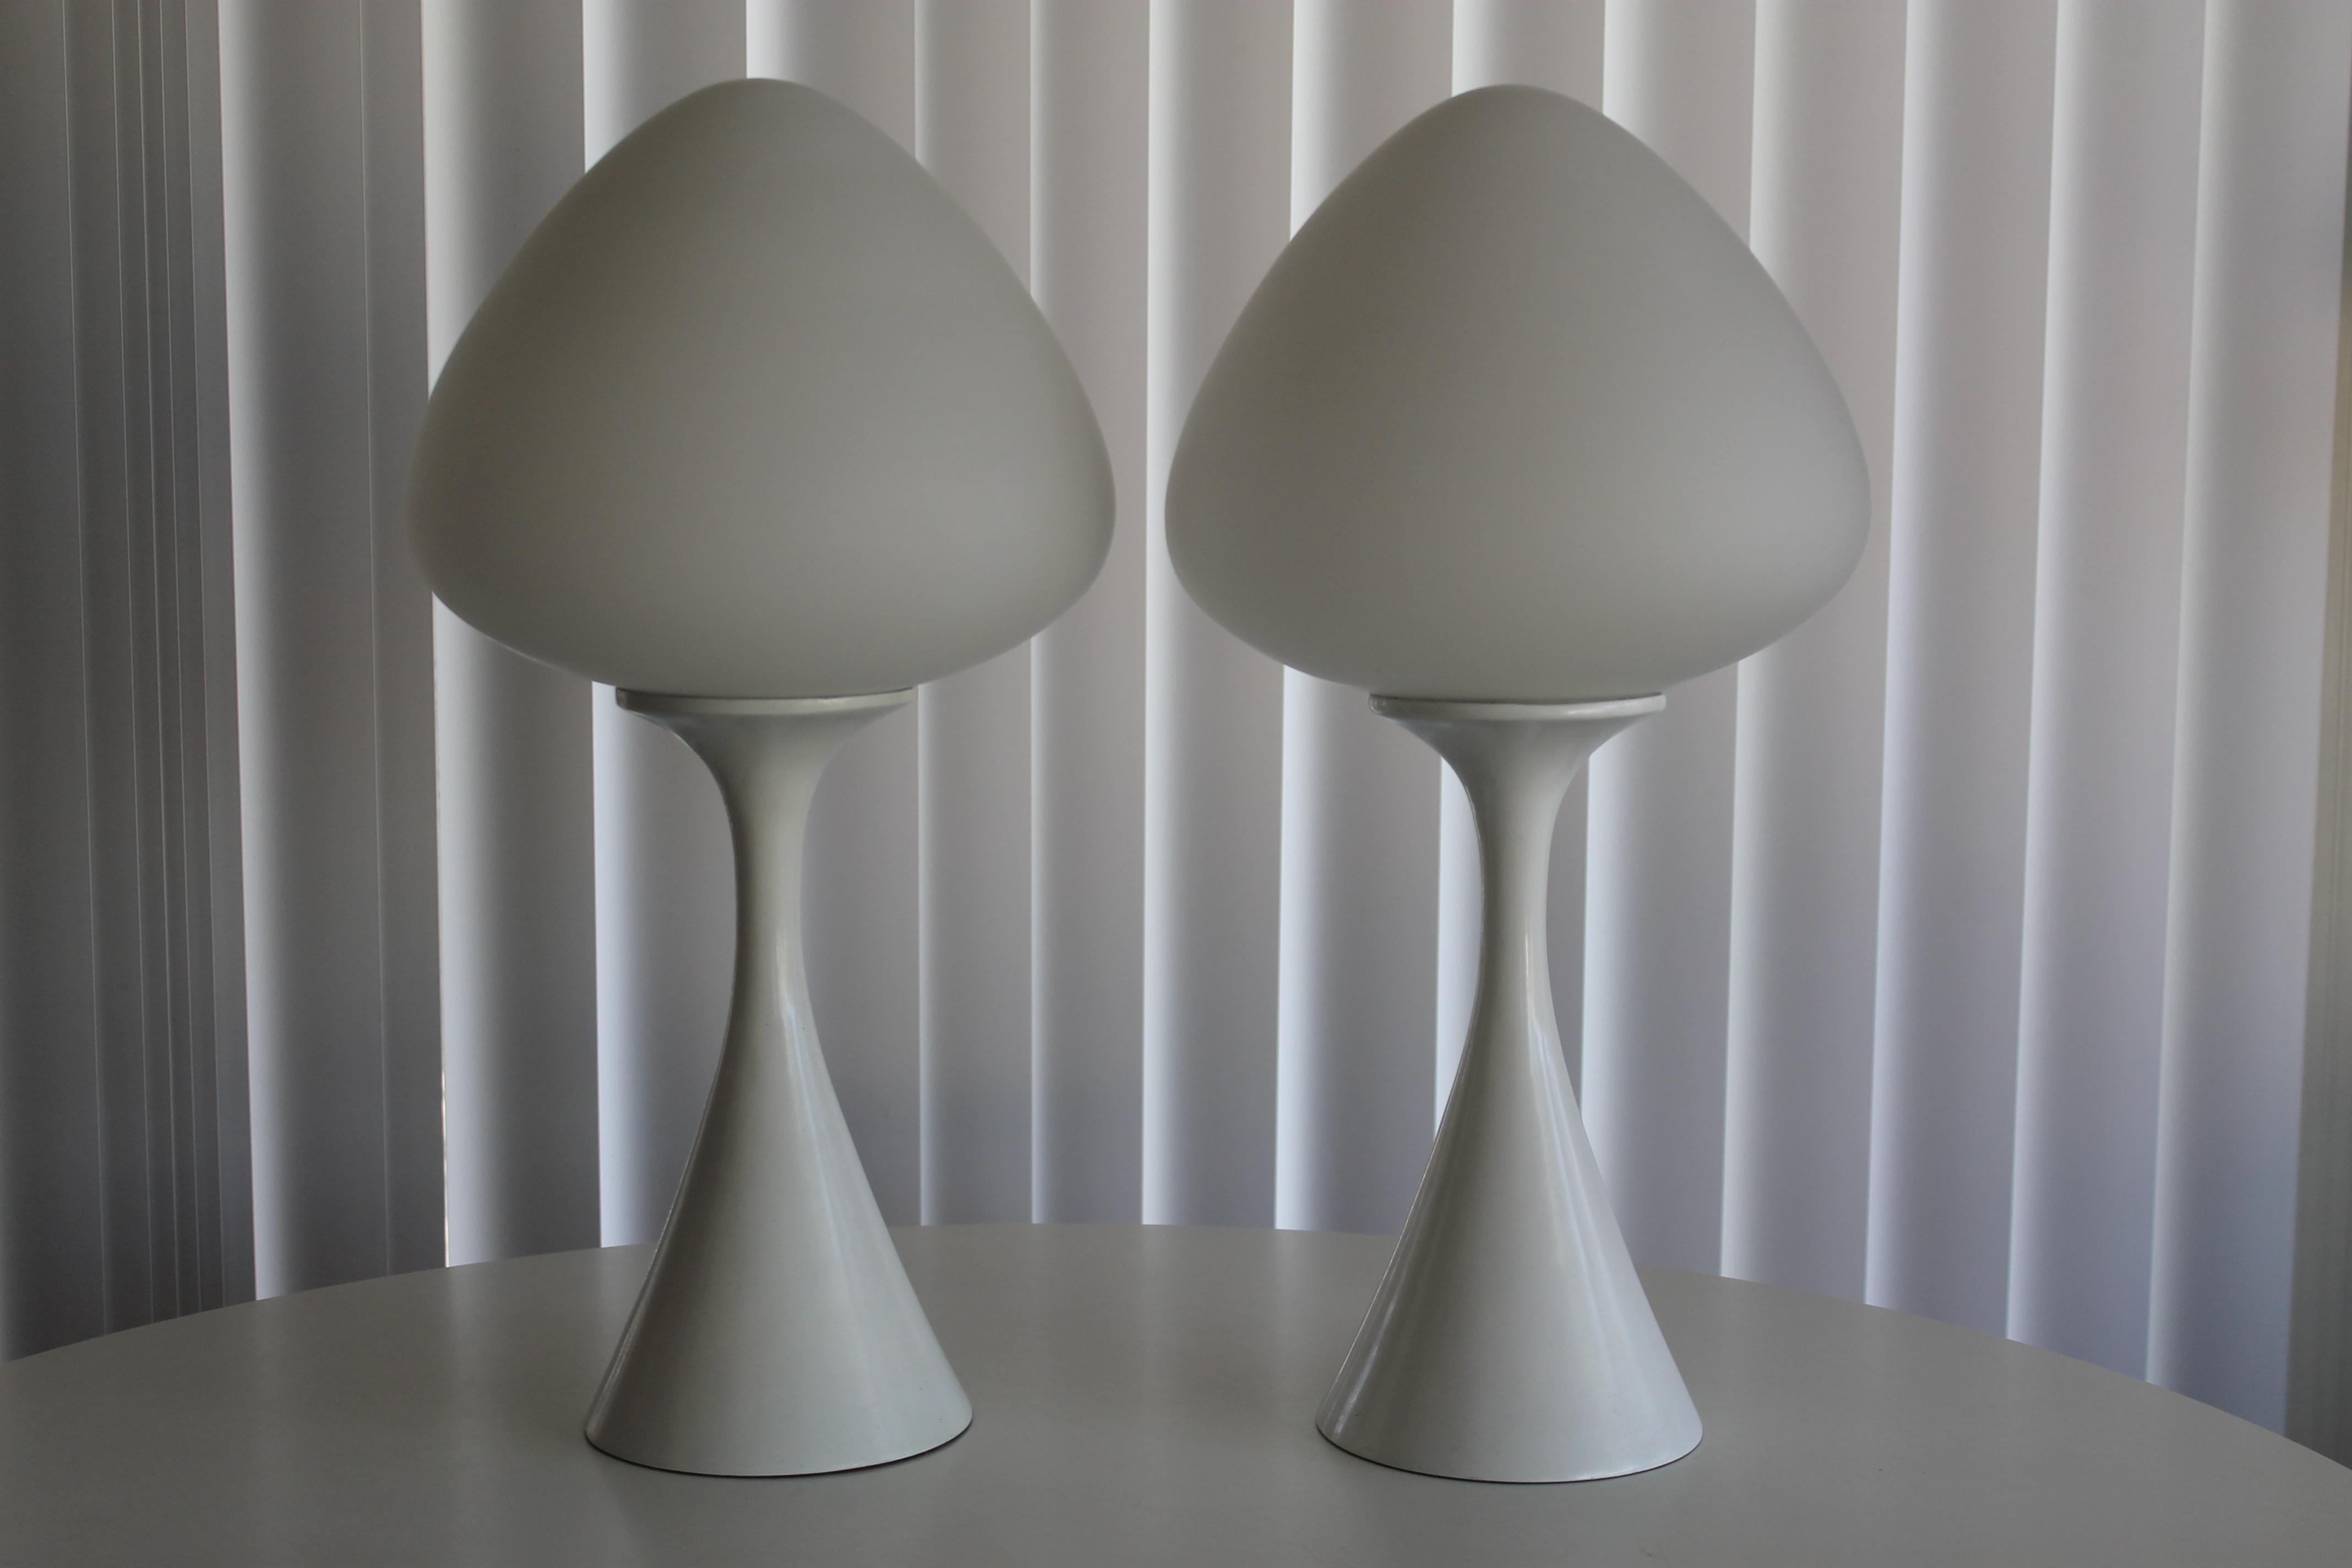 A matched pair of mushroom lamps by the Laurel Lamp Company. They have their original white finish, with acorn style globes. Lamps are all original. Lamps measure 19